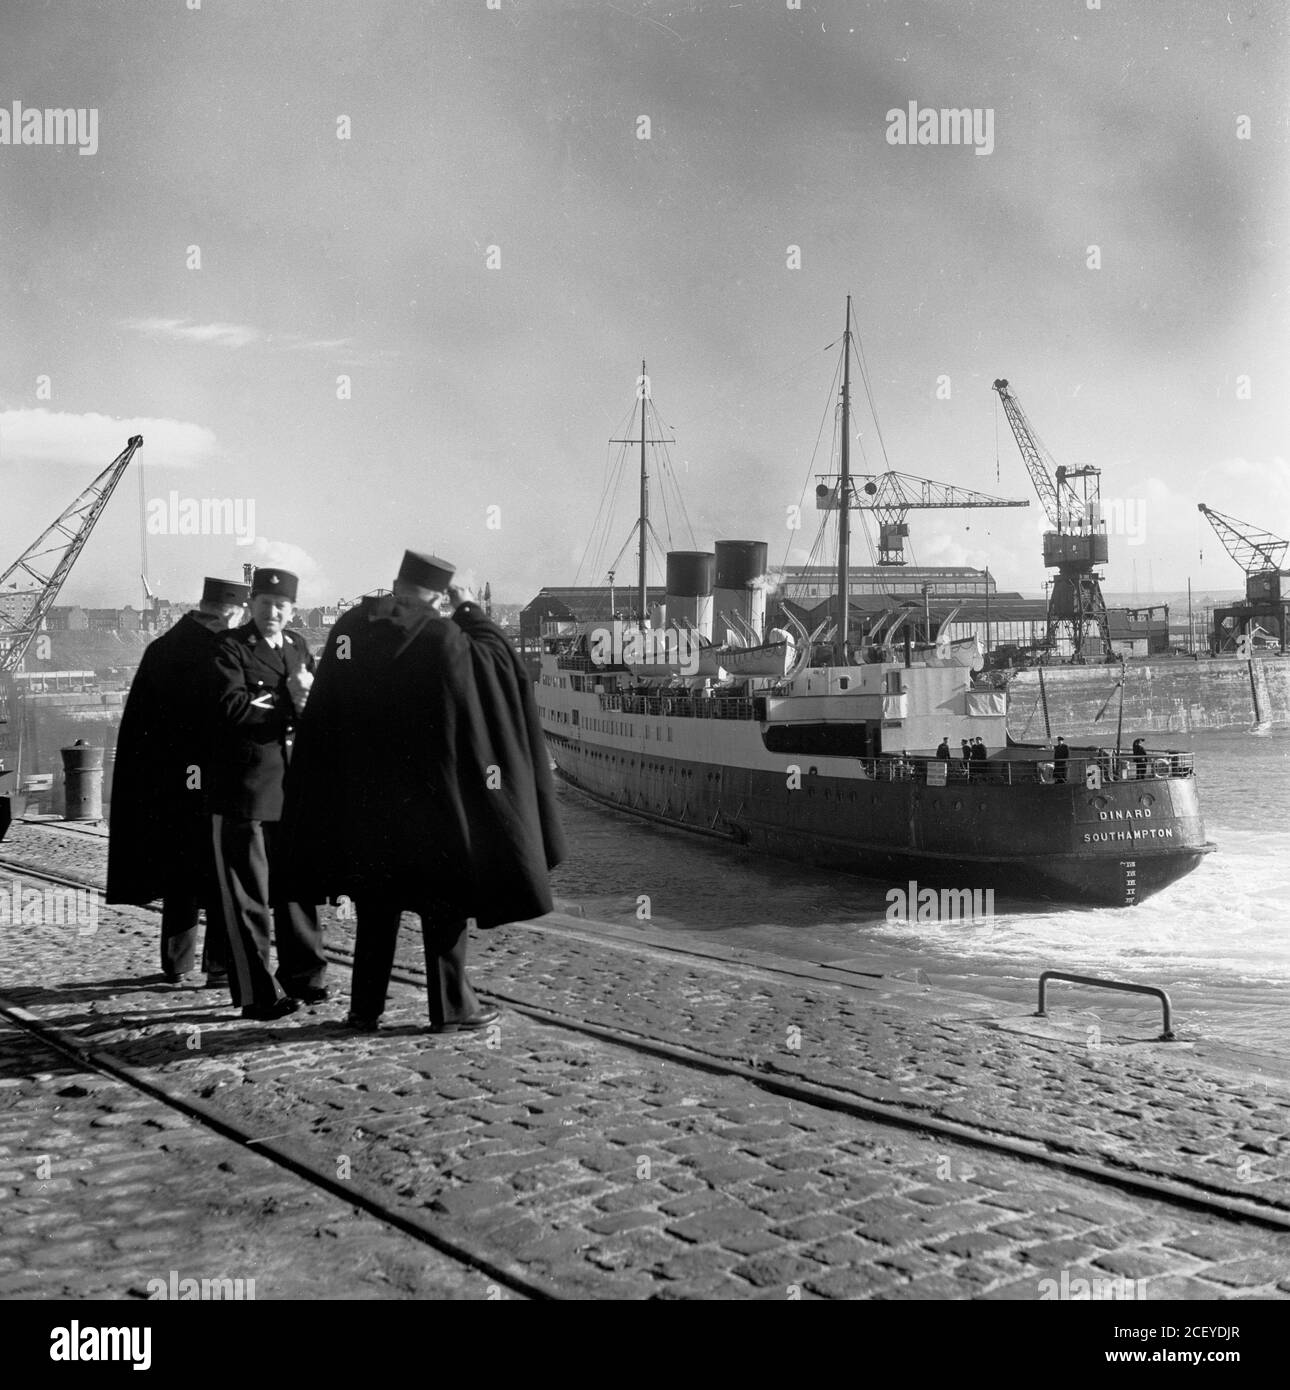 1950s, historical, French gendarmes  on the cobbled quay in Calais, France as a large passenger ferry, Dinard, Southampton, comes into the port. The steam turbine ship, TS Dinard was built in 1924 by William Denny & Bros of Dunbarton for the Southern Railway Company, Southampton, England, UK for the route Southampton - St Malo During WW2 she served at both Dunkirk and Normandy. Following the war, she was rebuilt as a car and passenger ferry and operated between Dover and Boulogne. At this time cars were still crane-loaded onto ships. She remained in service until 1958. Stock Photo